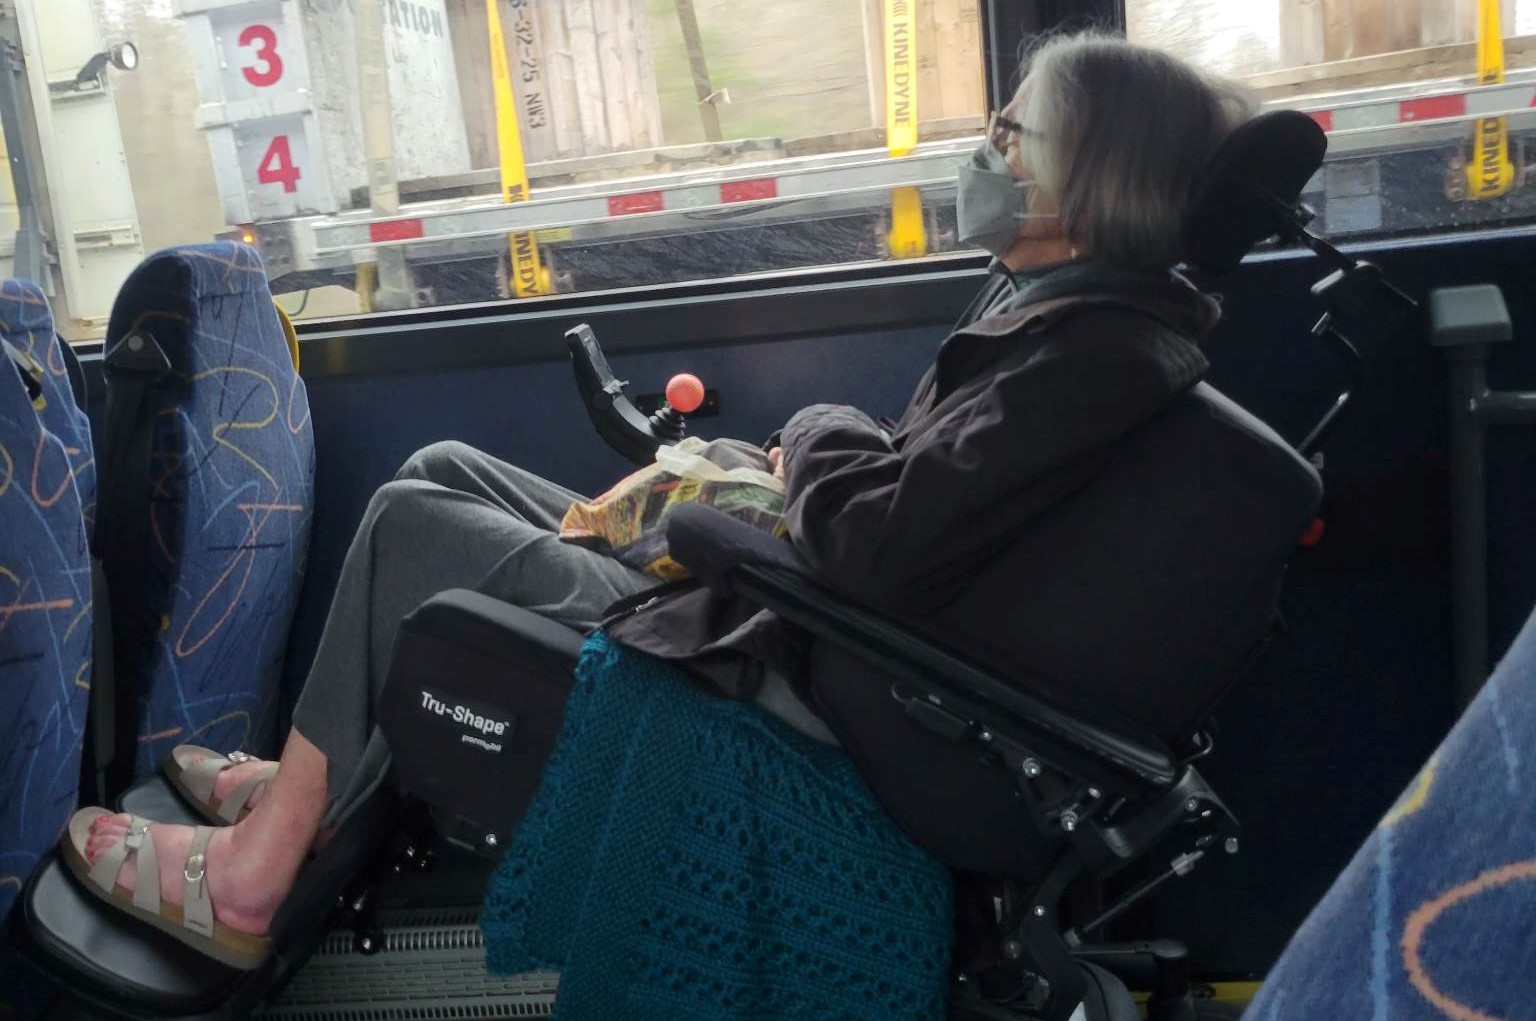 Dorothy is seated in her powerchair inside the Megabus and looking out the window.